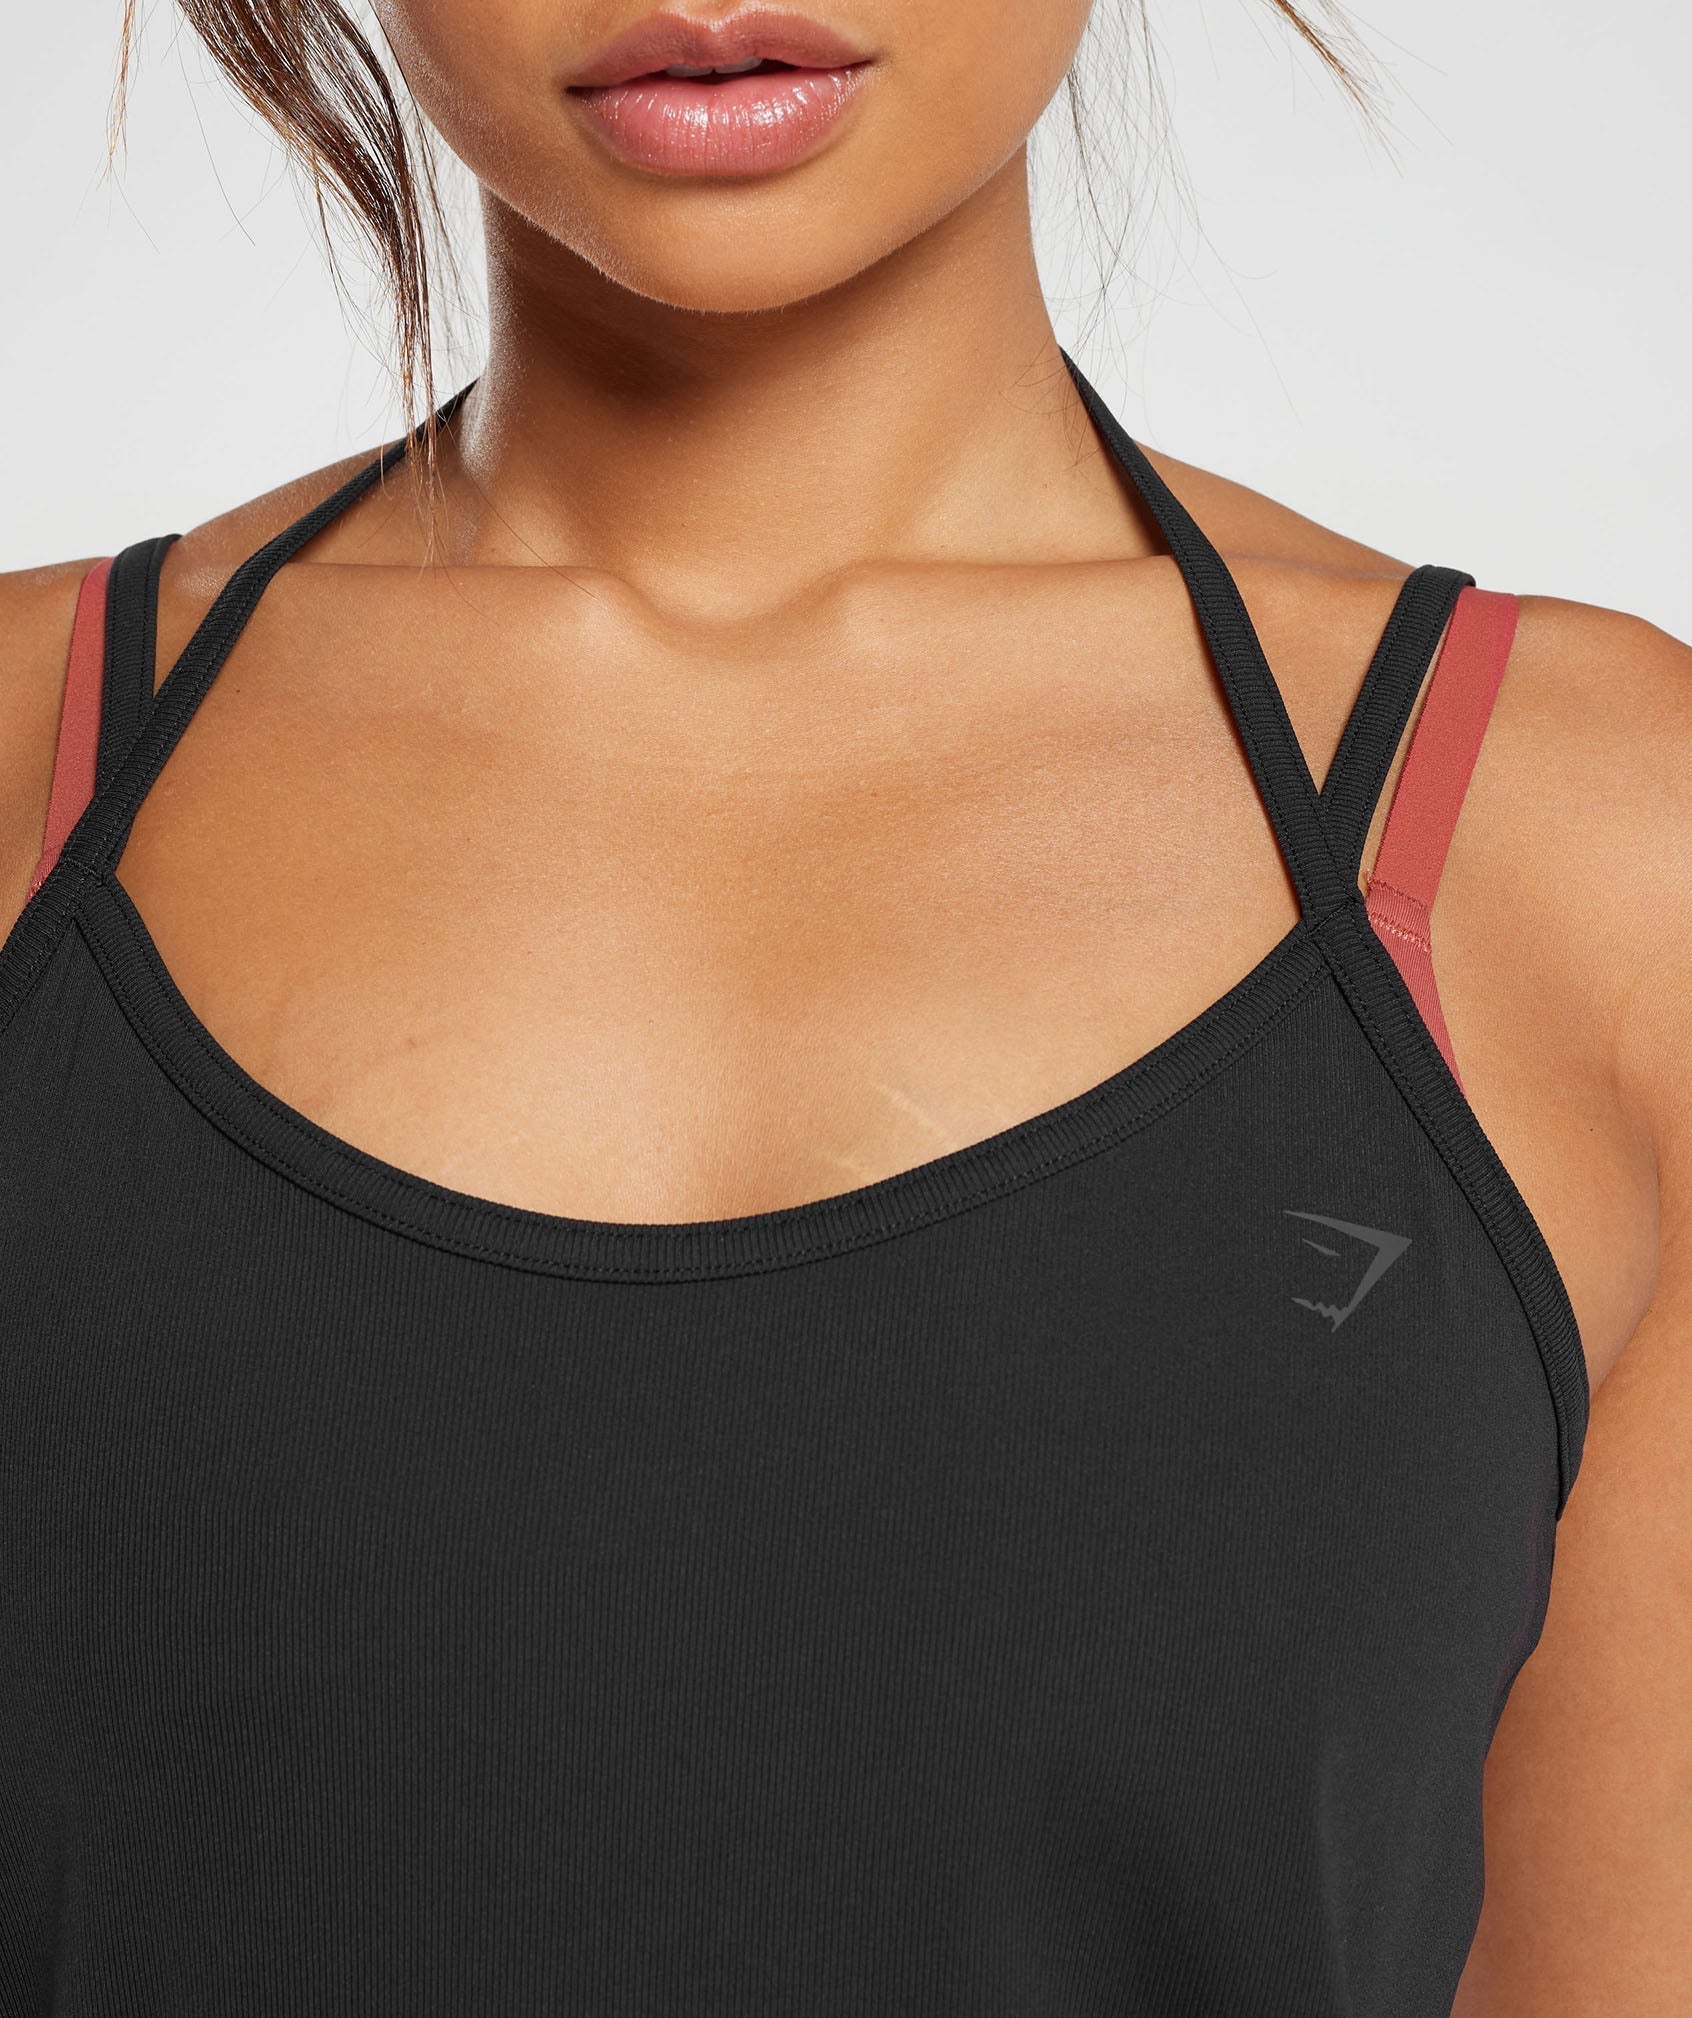 Elevate Strappy Tank in Black - view 5